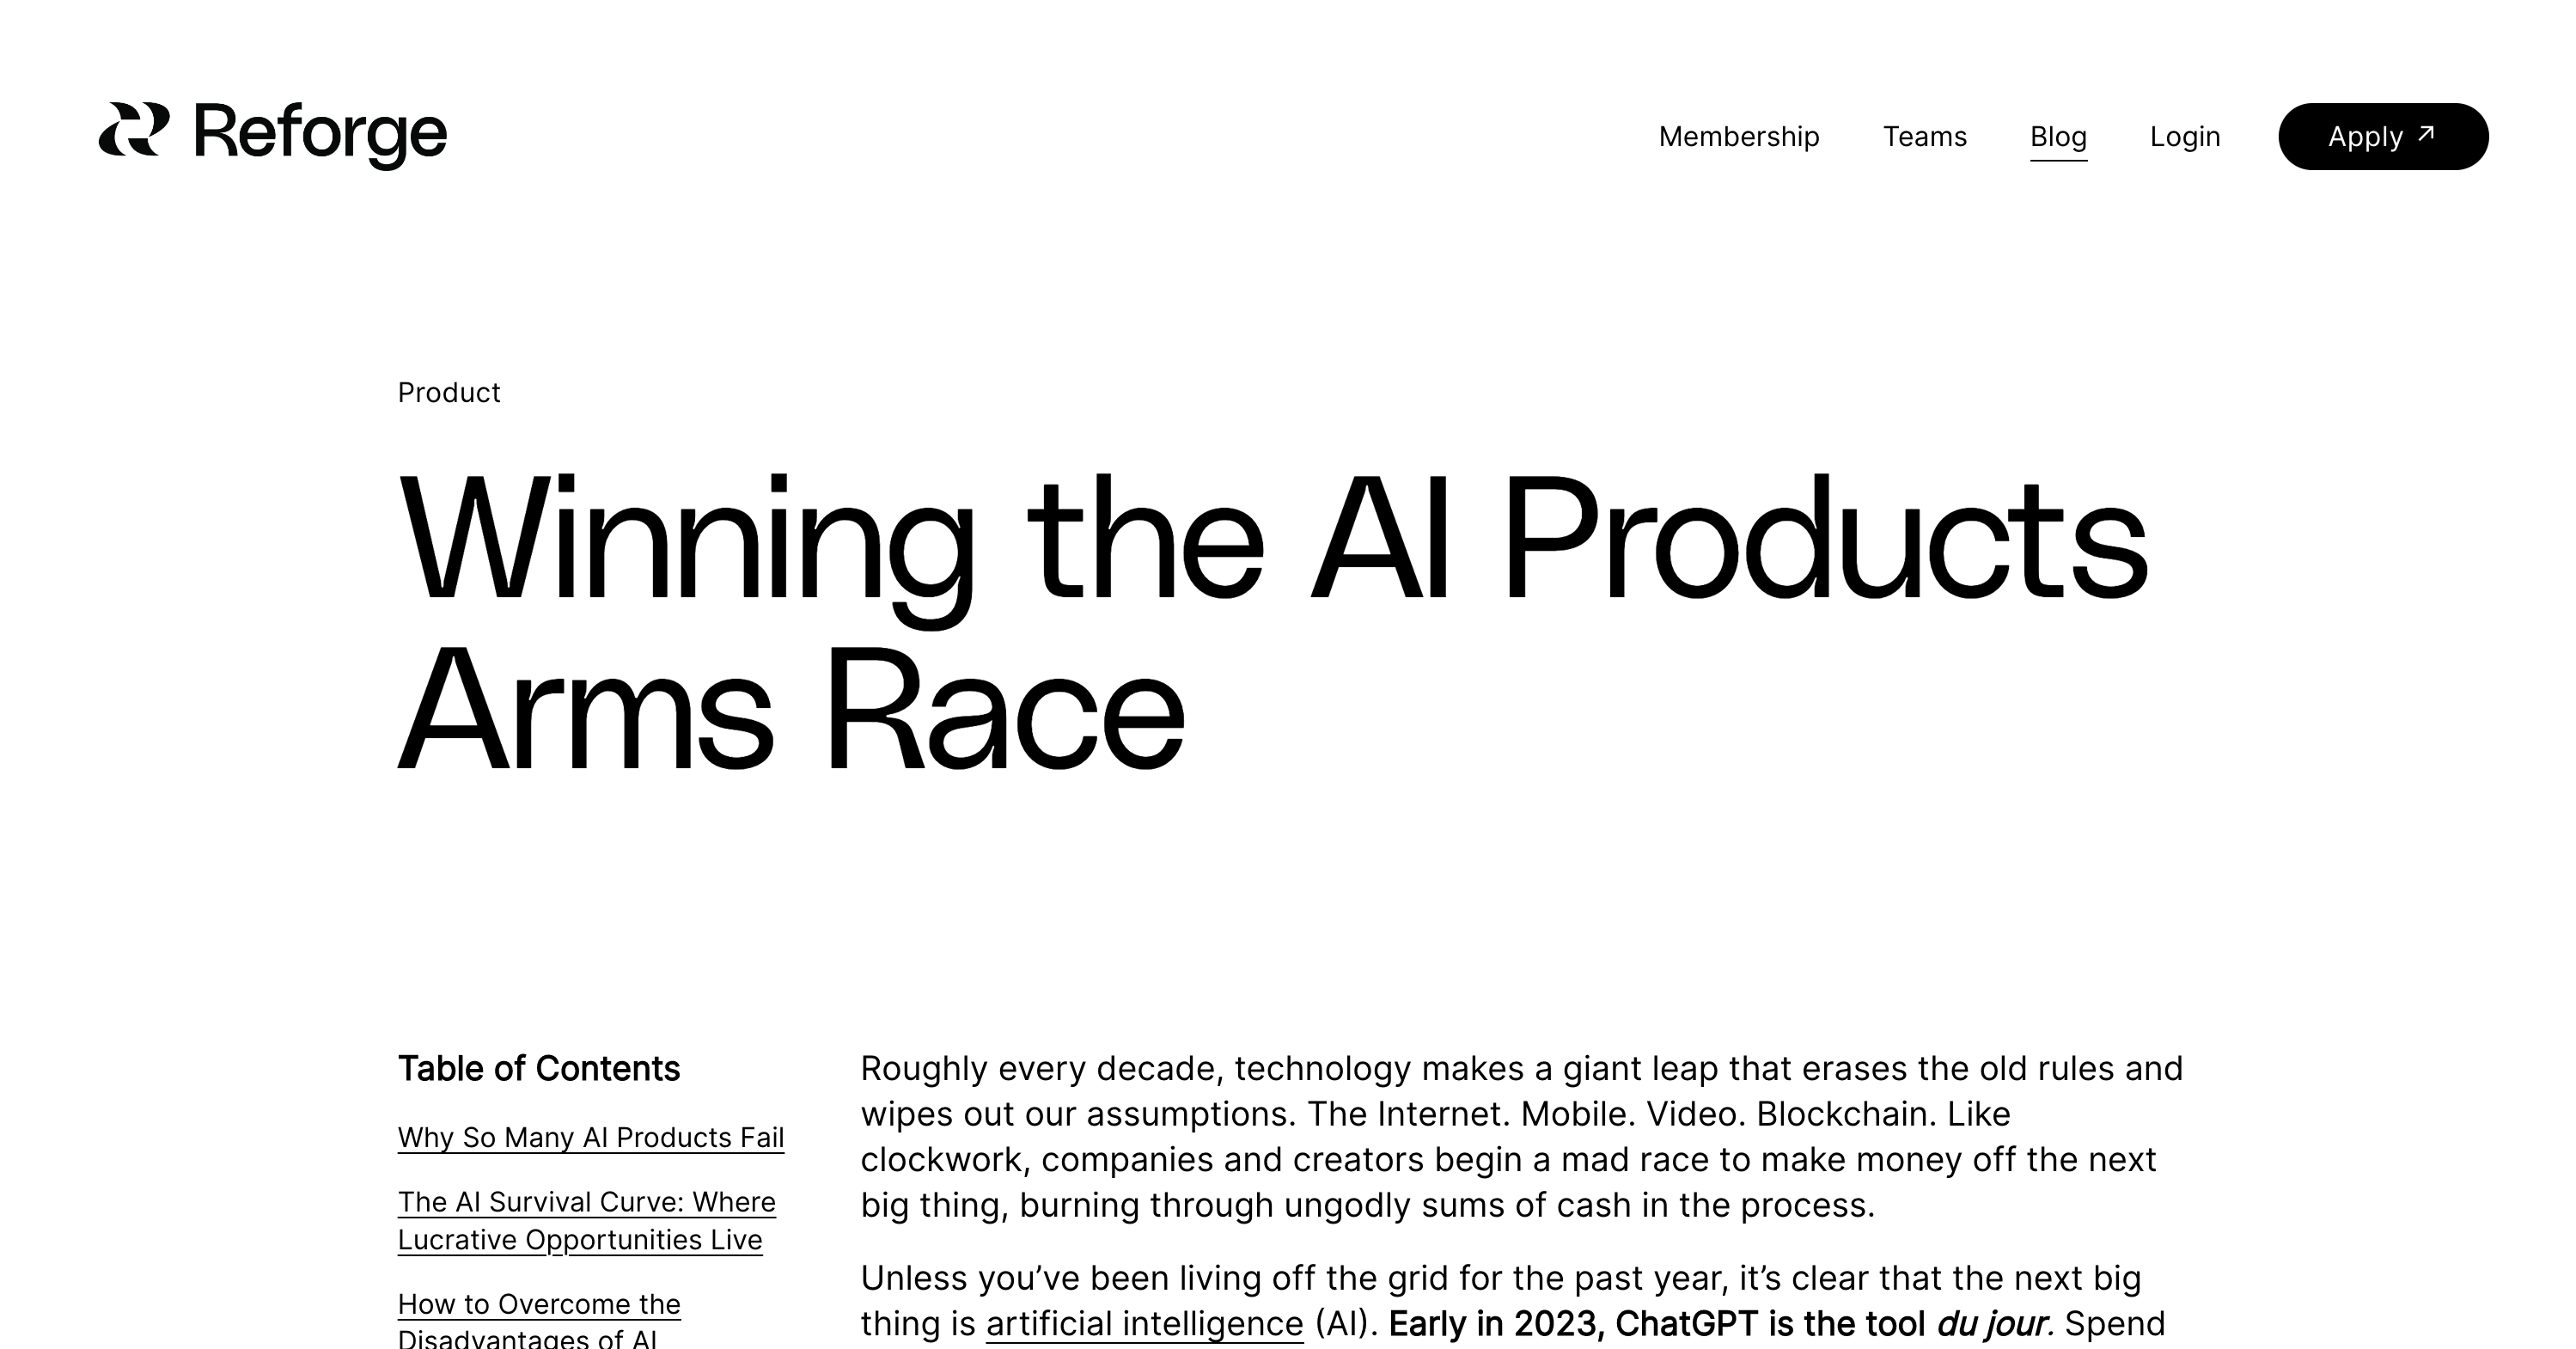 Winning the AI Products Arms Race